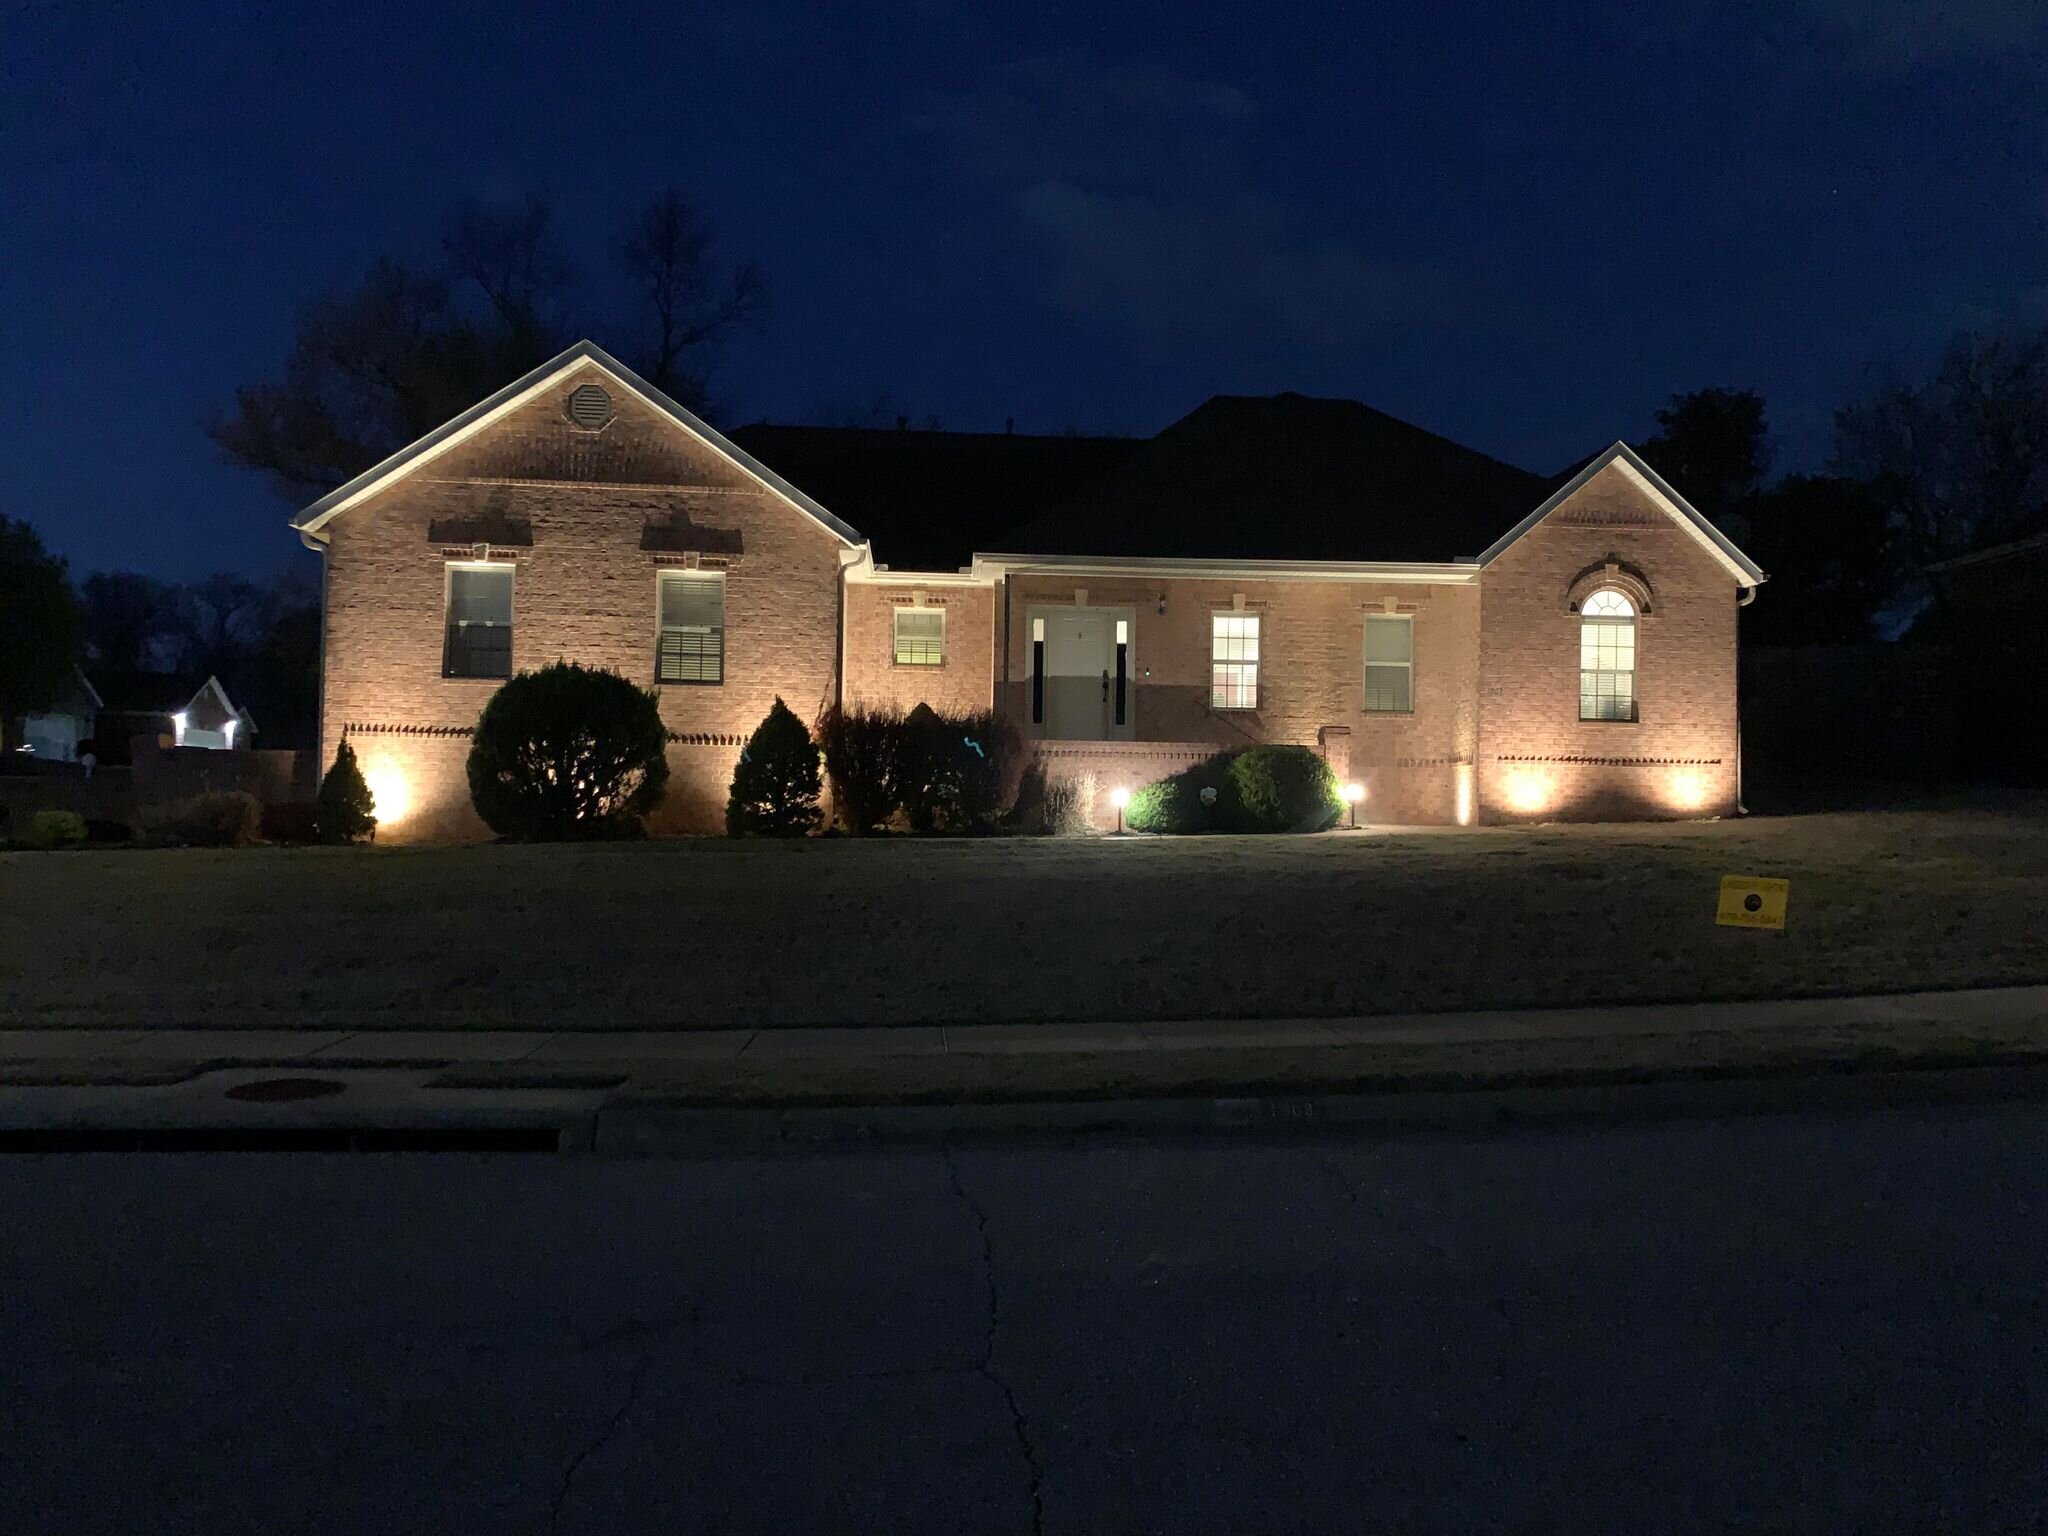 ✍️Every landscape lighting project requires a 𝑐𝑢𝑠𝑡𝑜𝑚 𝑑𝑒𝑠𝑖𝑔𝑛 with specific lights chosen to enhance the architecture and landscaping of the property. 
In this project we completed earlier this week, we utilized up-lights and 𝙨𝙞𝙡𝙝𝙤𝙪𝙚